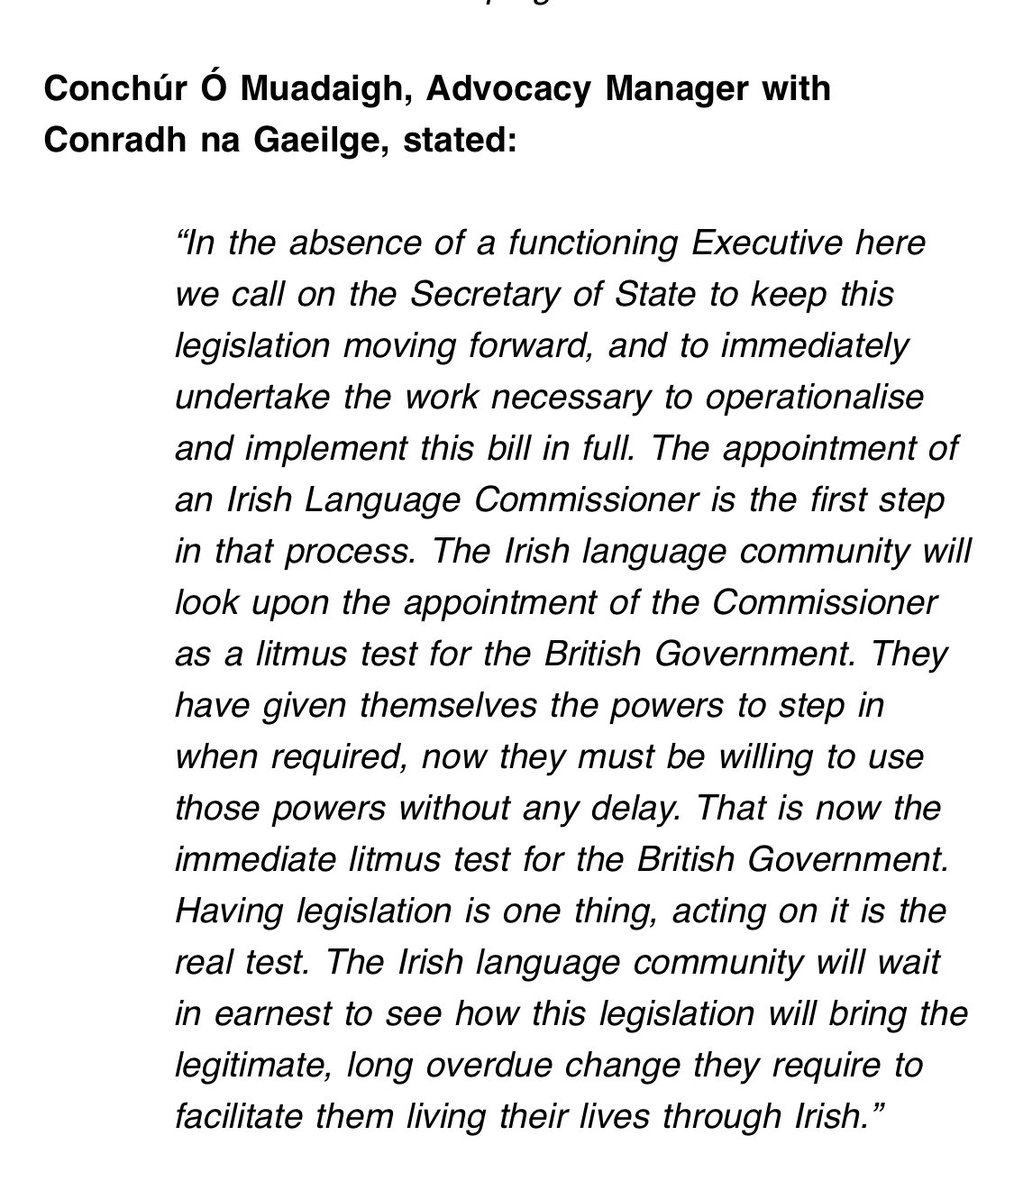 ‘Another historic staging post for Irish language Community as Irish language legislation passes through final Westminster stages’ @CnaG The Bill will now go forward for Royal Assent and commencement dates will be issued by the NIO.